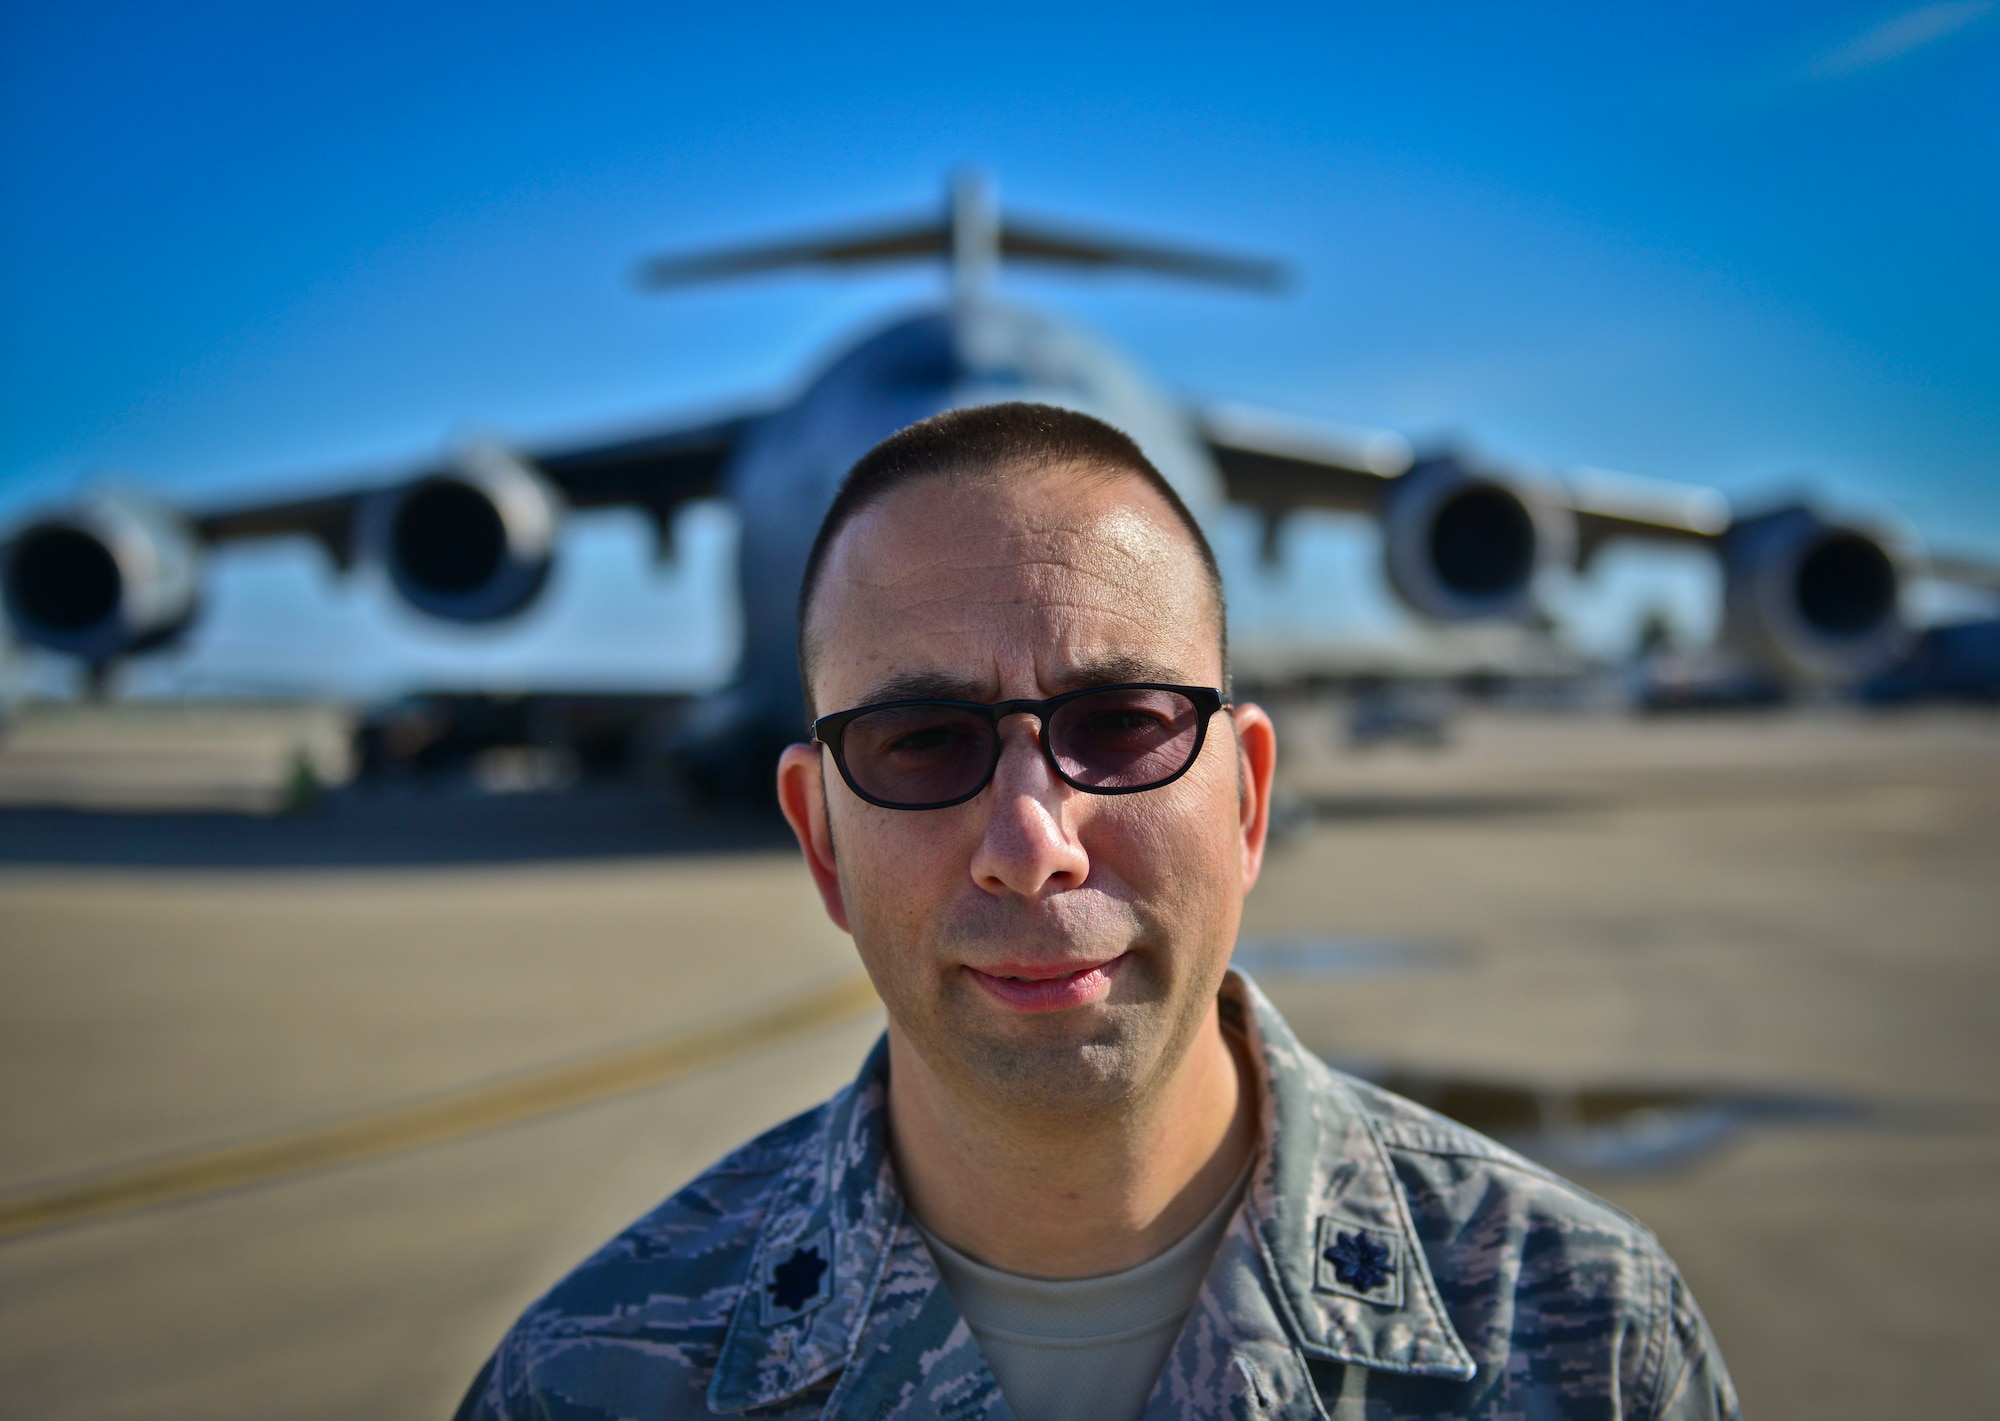 Lt. Col. David Holz, 39th Maintenance Squadron commander, took command of the 39th MXS June 21, 2013, Incirlik Air Base, Turkey. (U.S. Air Force photo by Senior Airman Nicole Sikorski/Released)